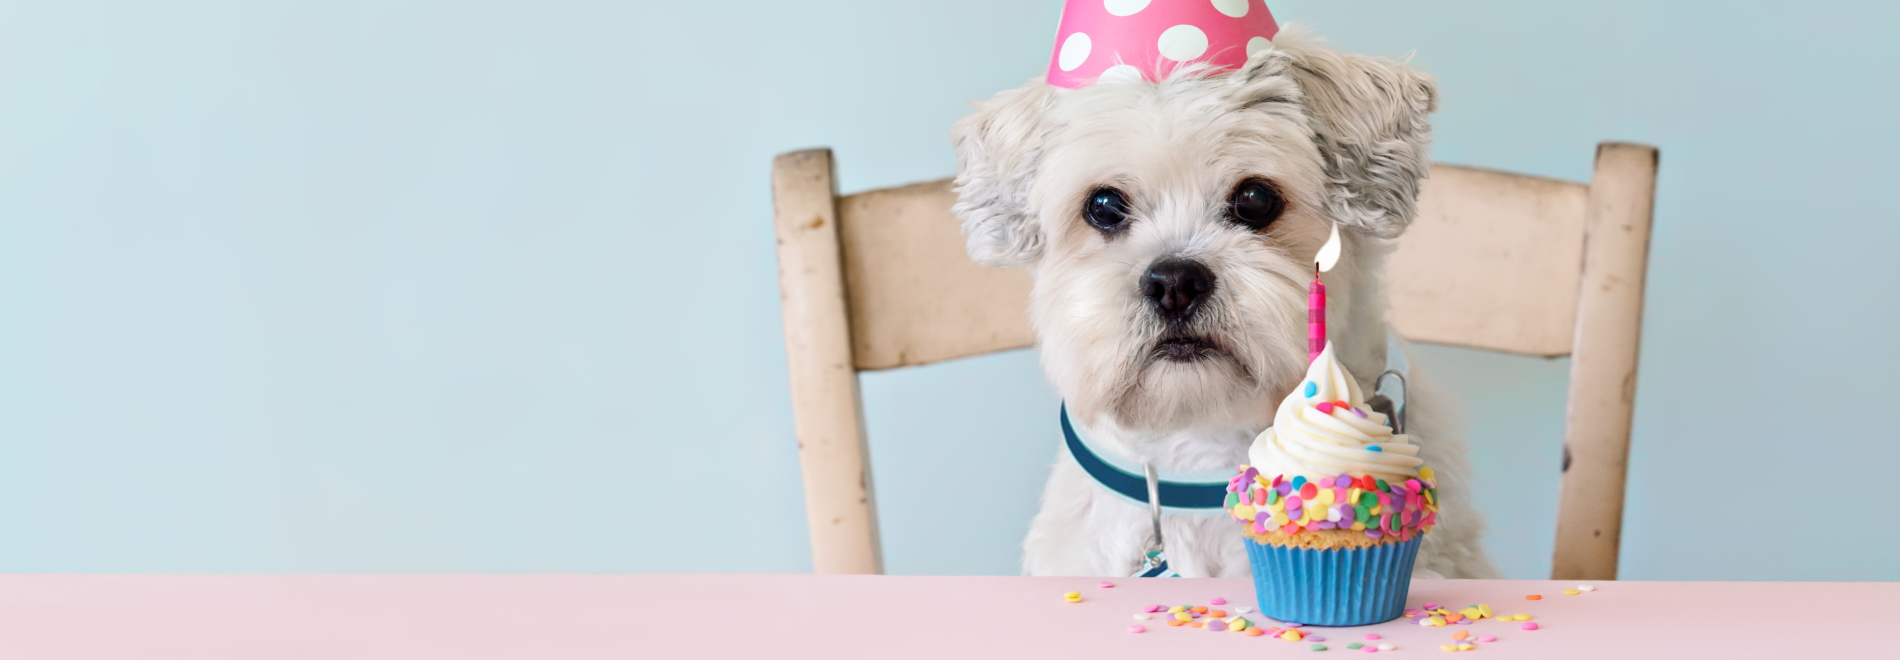 Image of white dog sitting in front of a colorful cupake while wearing a pink polka hat party hat